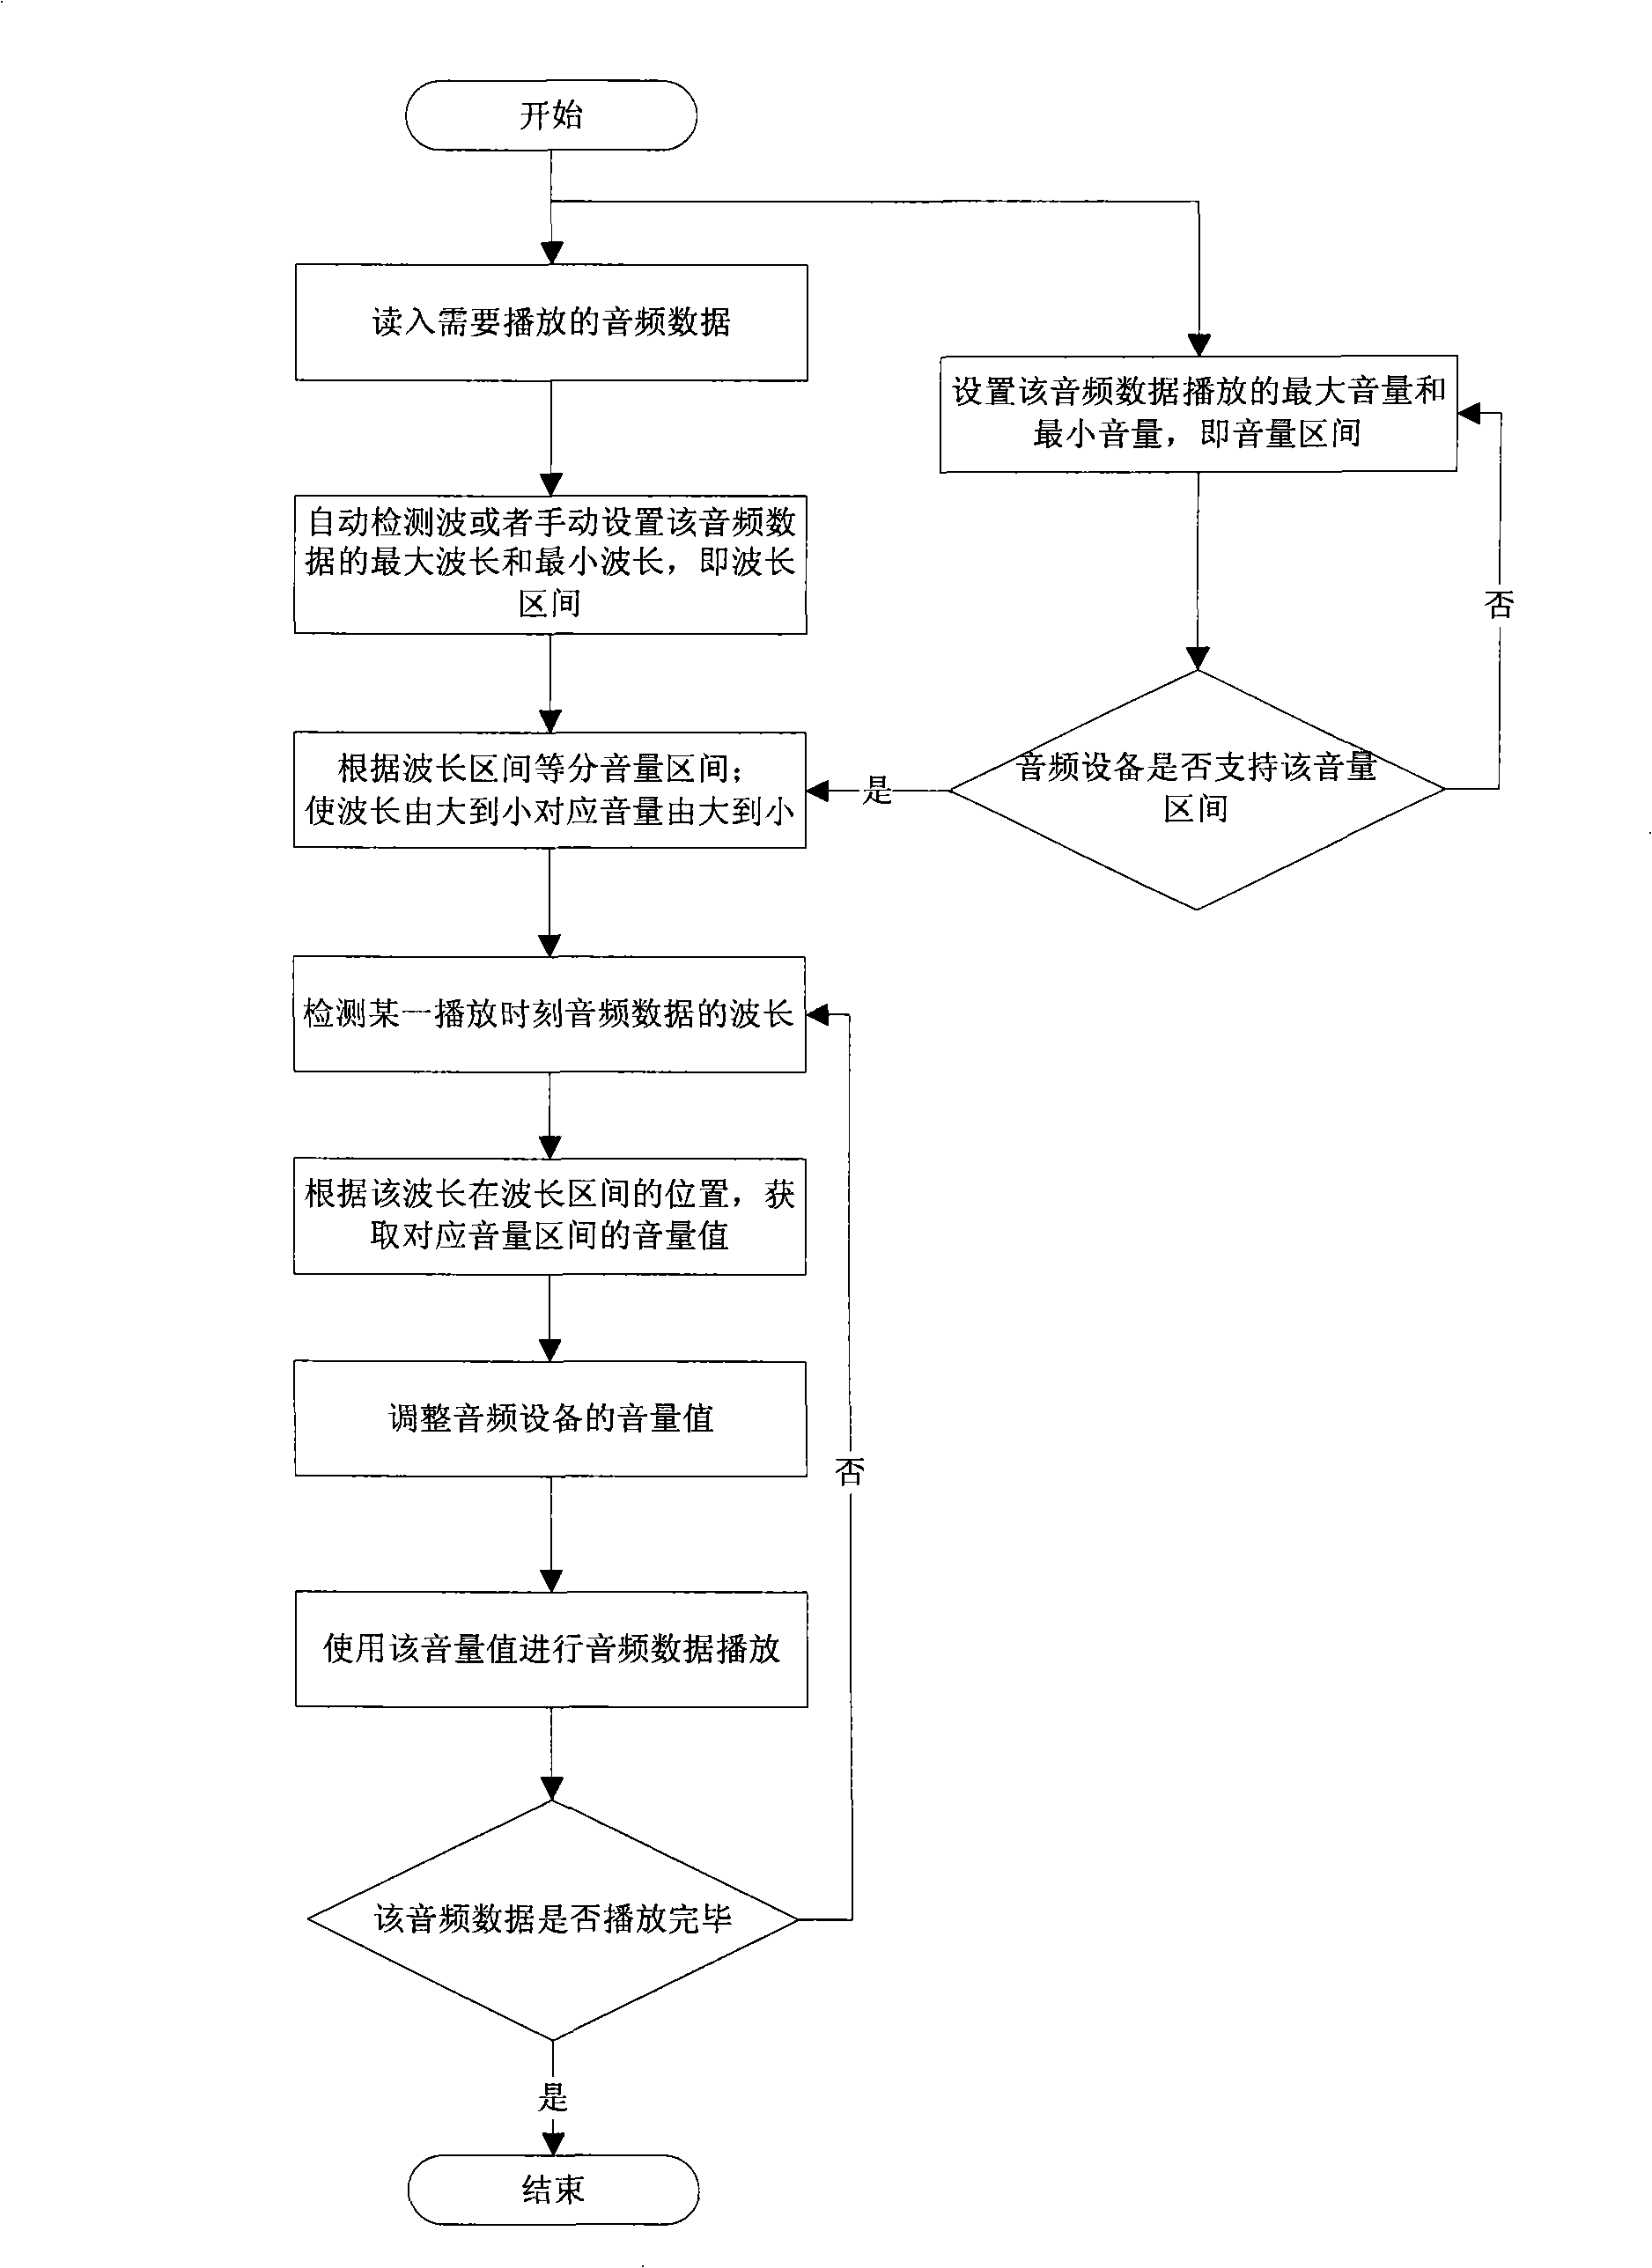 Method and system for dynamically regulating broadcast sound volume according to wavelength